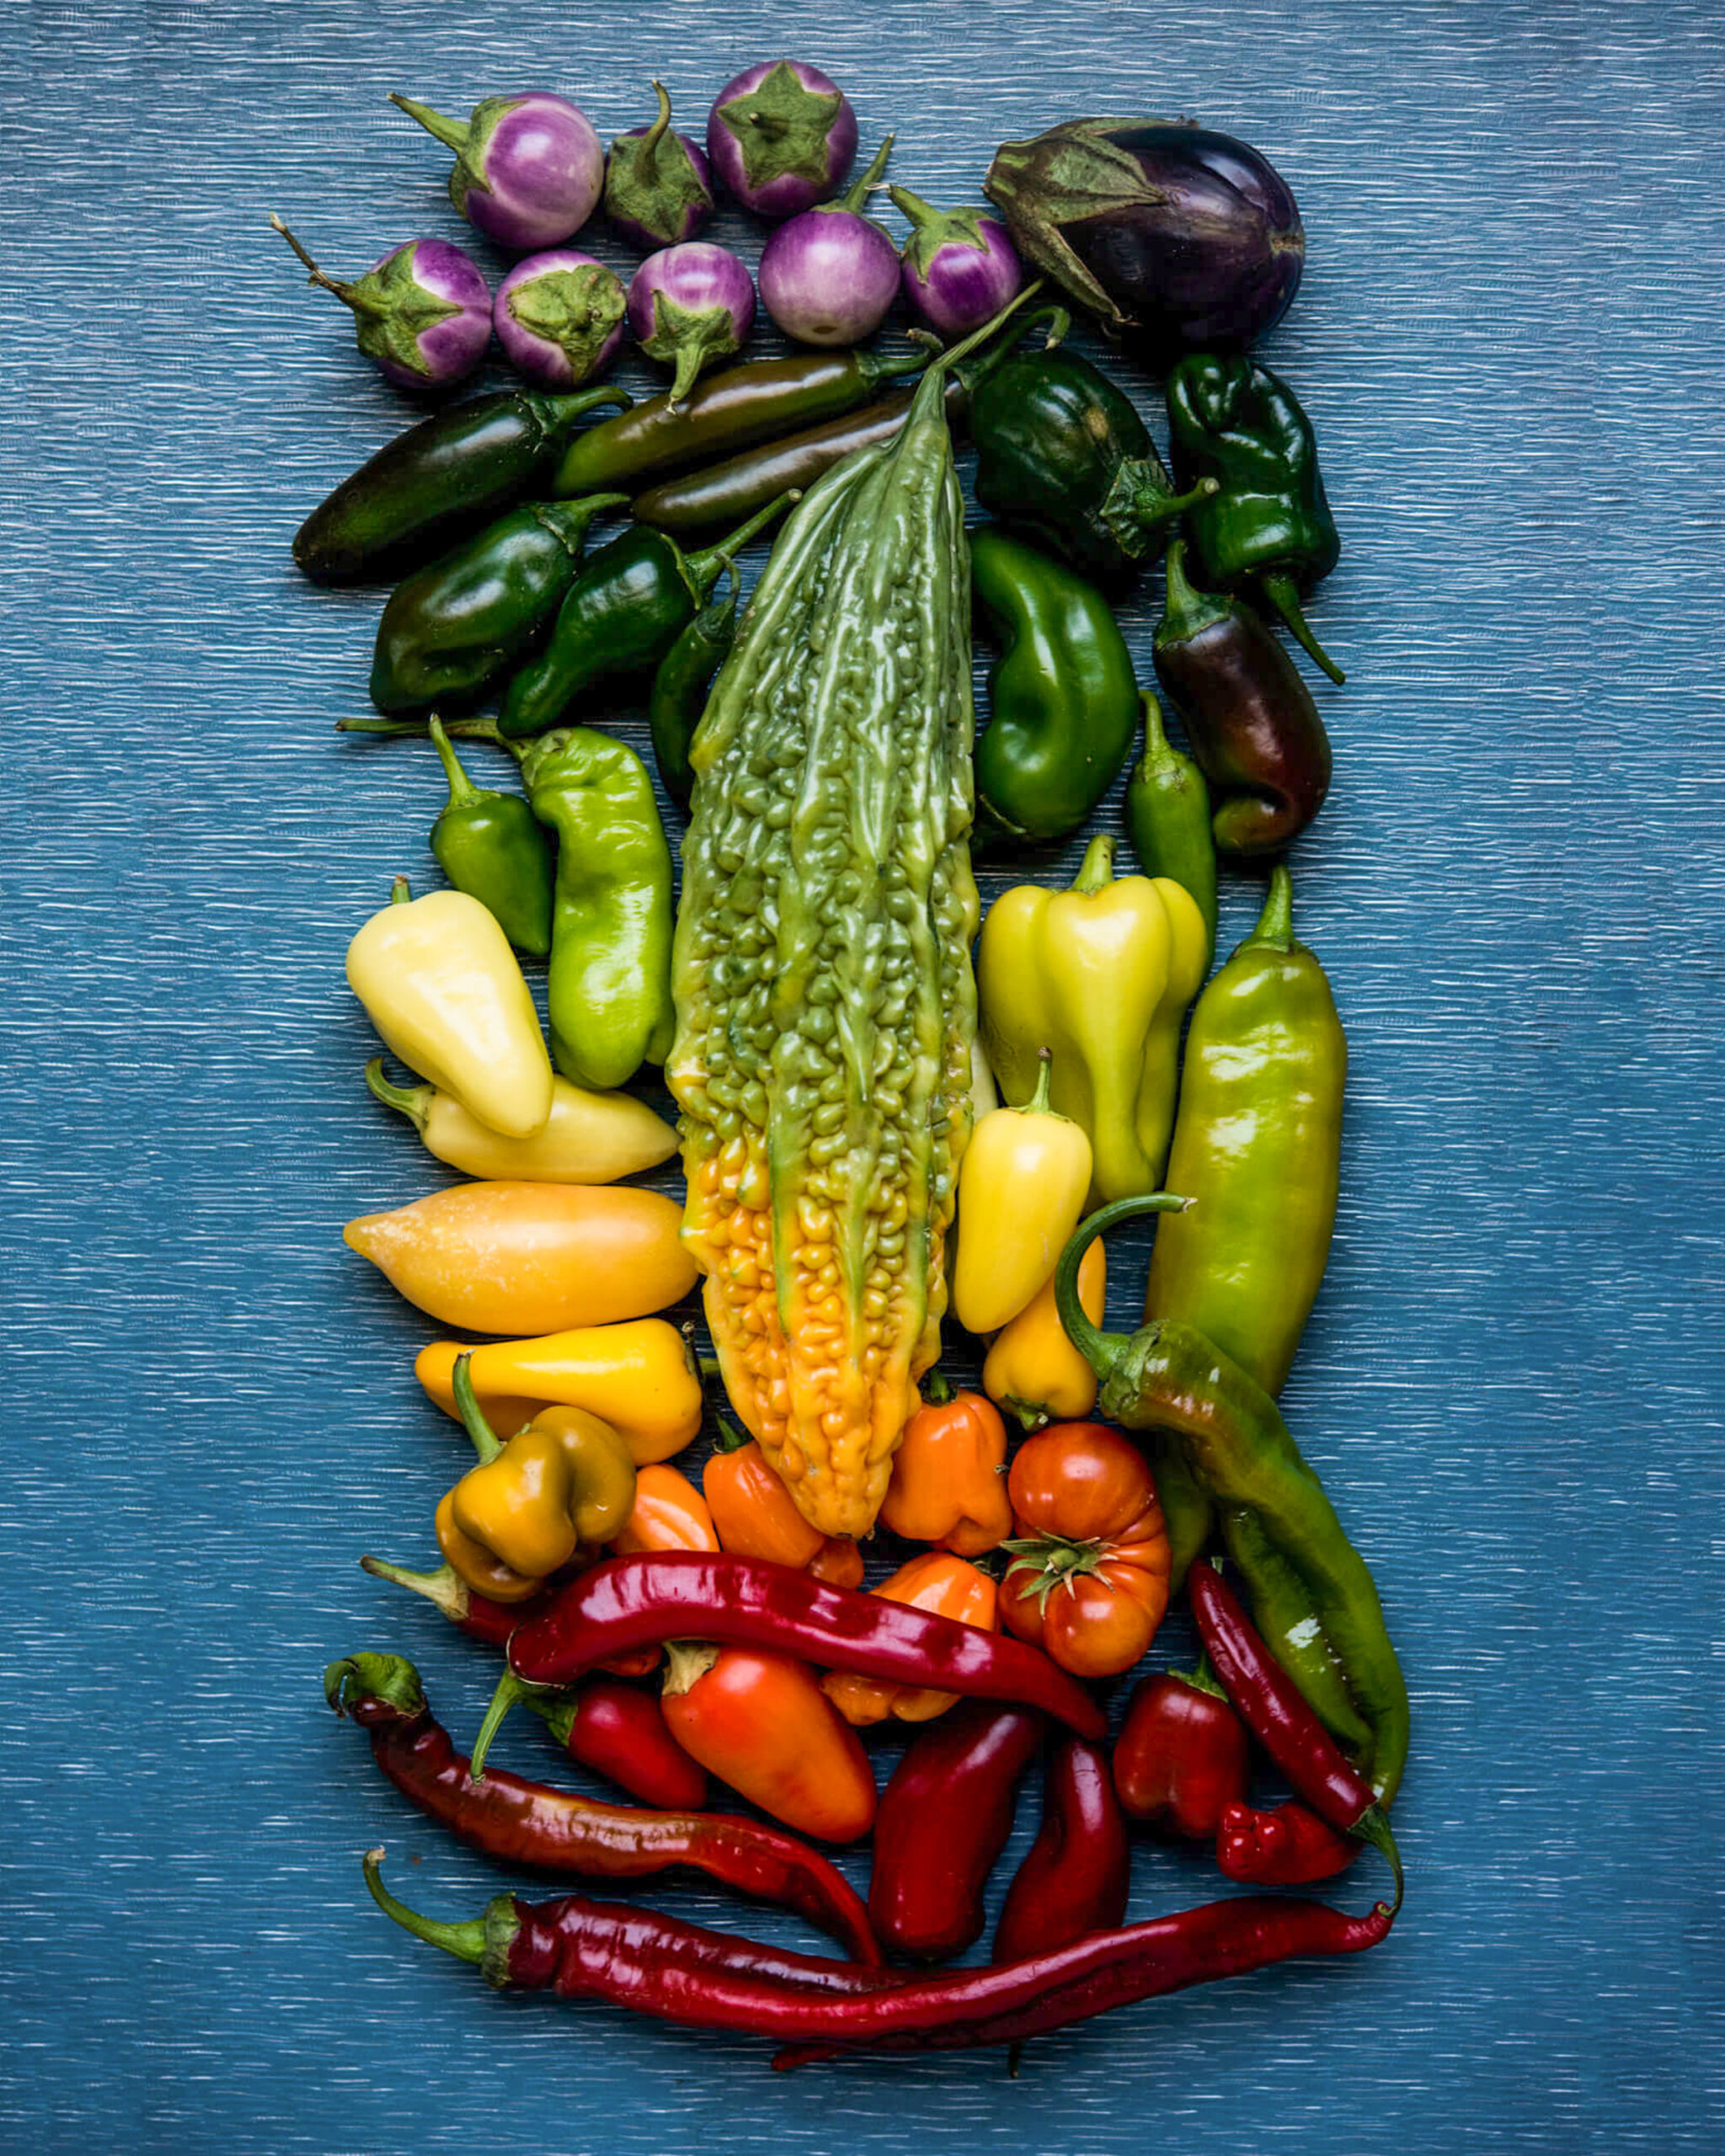 Assorted colorful vegetables including peppers, tomatoes, and eggplants arranged on a blue surface.